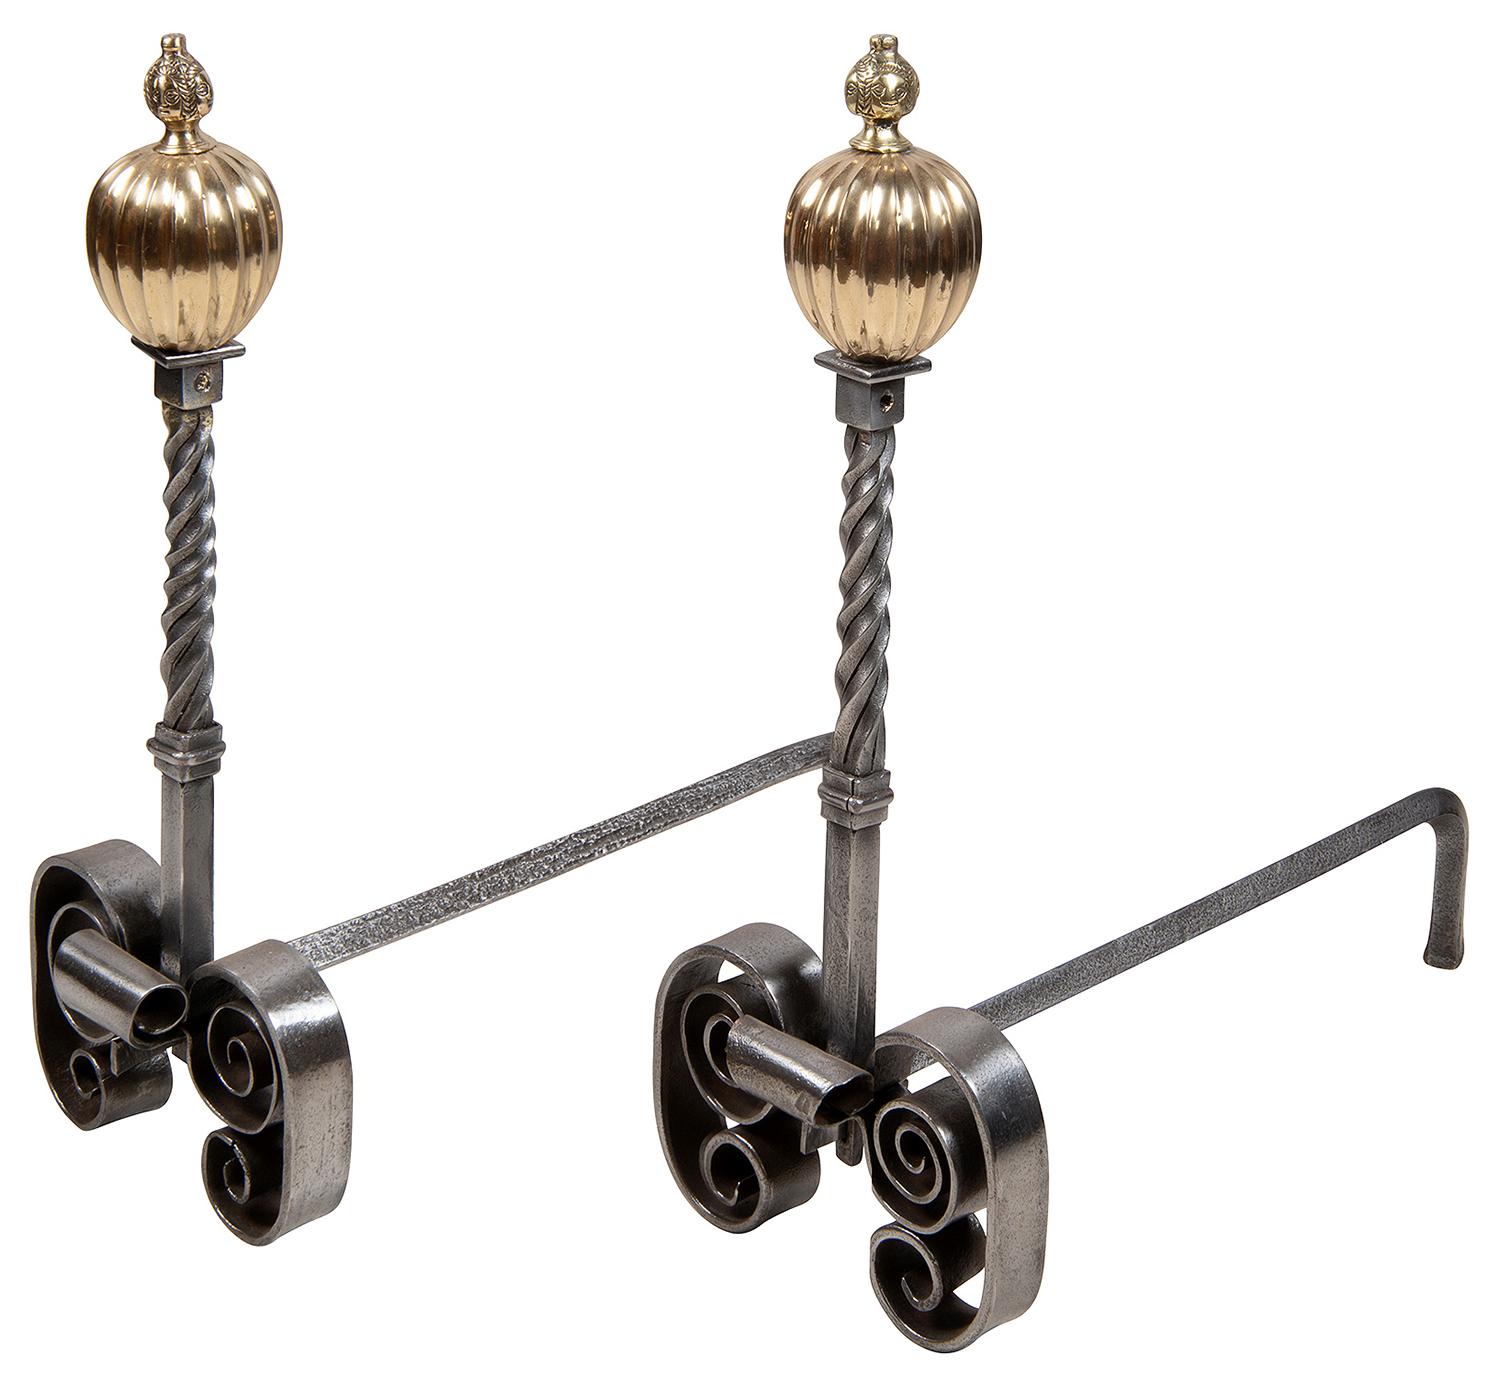 A good quality pair of early 19th century iron and brass andirons / fire dogs, each having reeded brass finials above twisted iron up rights and scrolling feet.